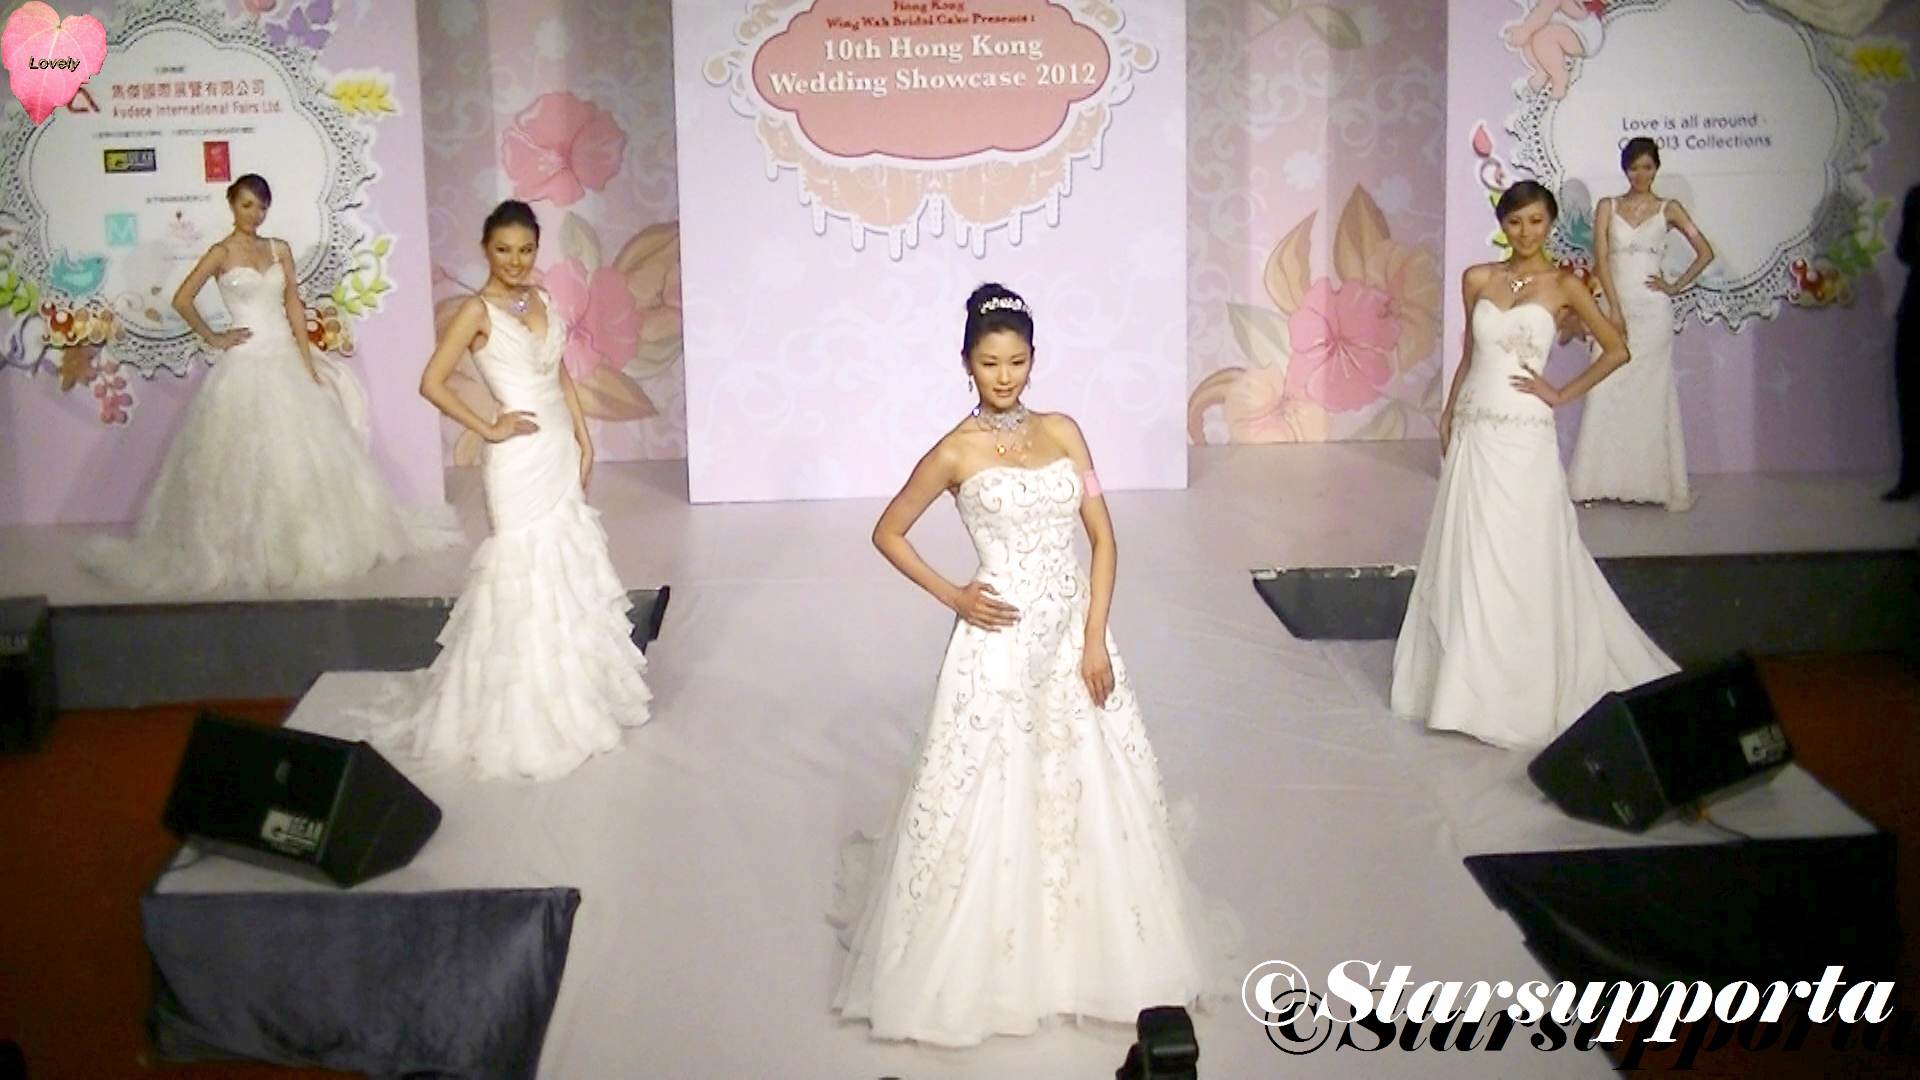 20120922 10th Hong Kong Wedding Showcase 2012 - Love is all around: GP 2013 Collections @ 香港Emax (video)